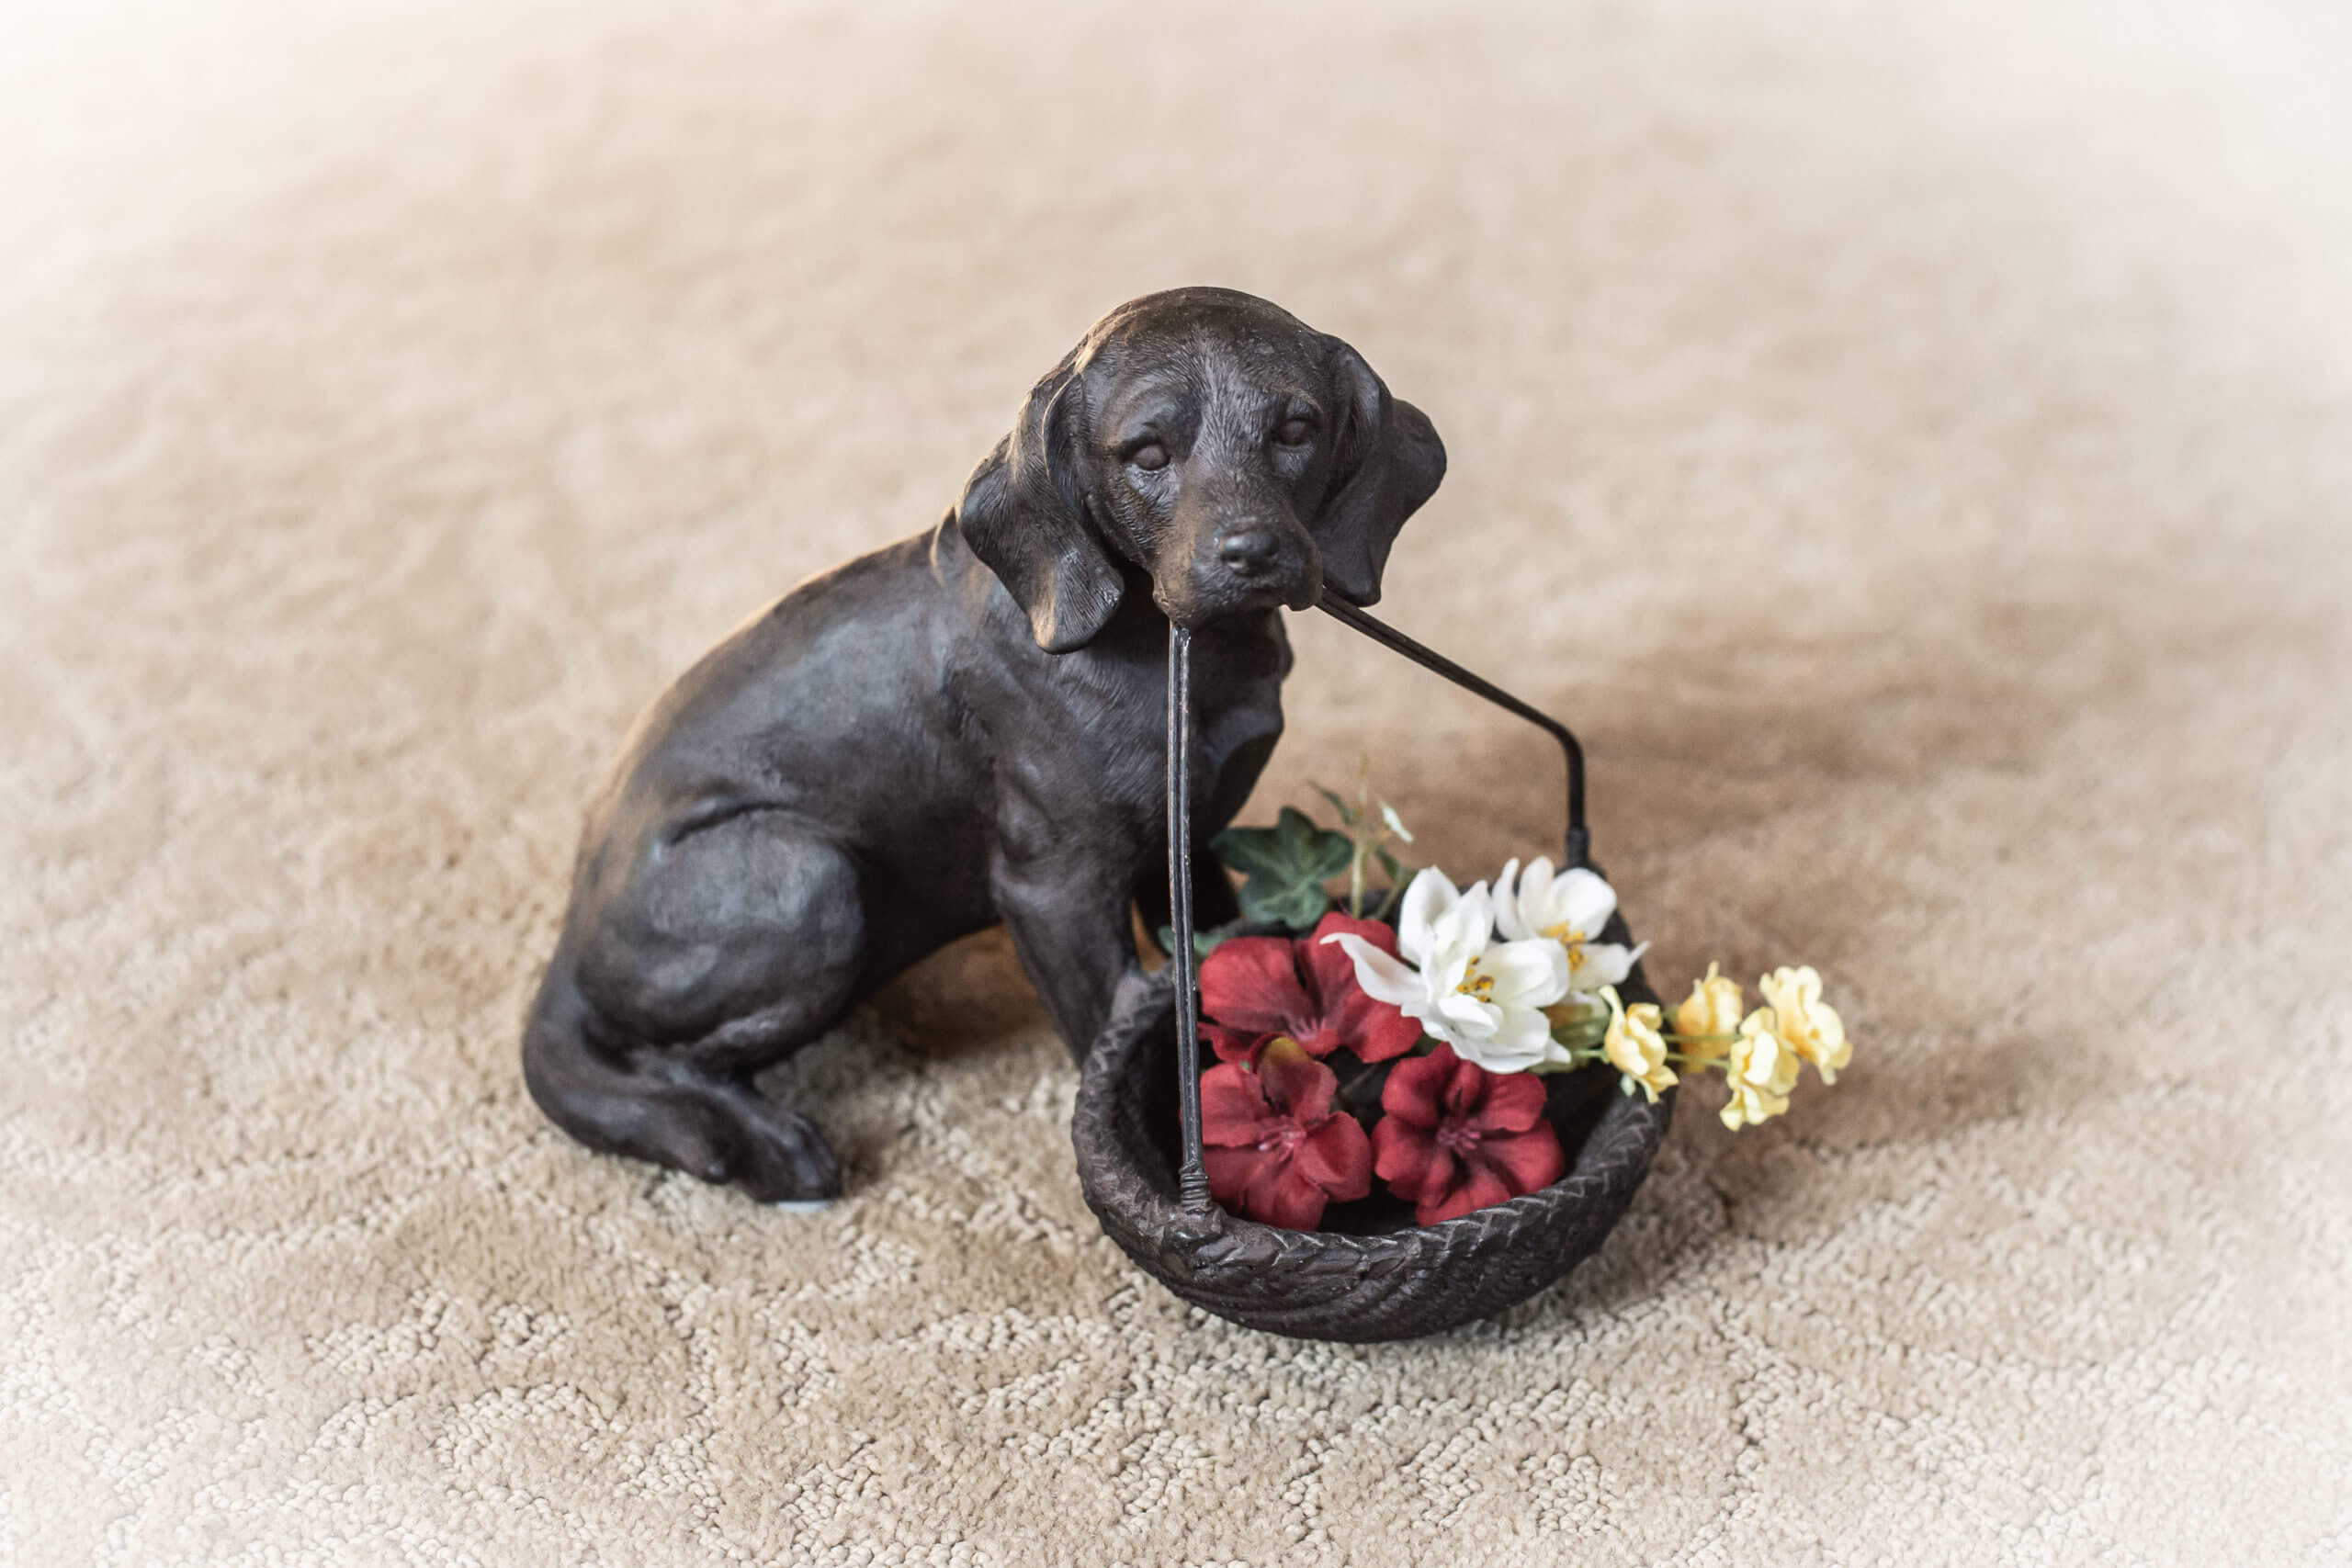 Color image of a dark brown dog figurine with a bucket in its mouth. The dog is in a seated position and the basket has small fake red, yellow, and white flowers in it.